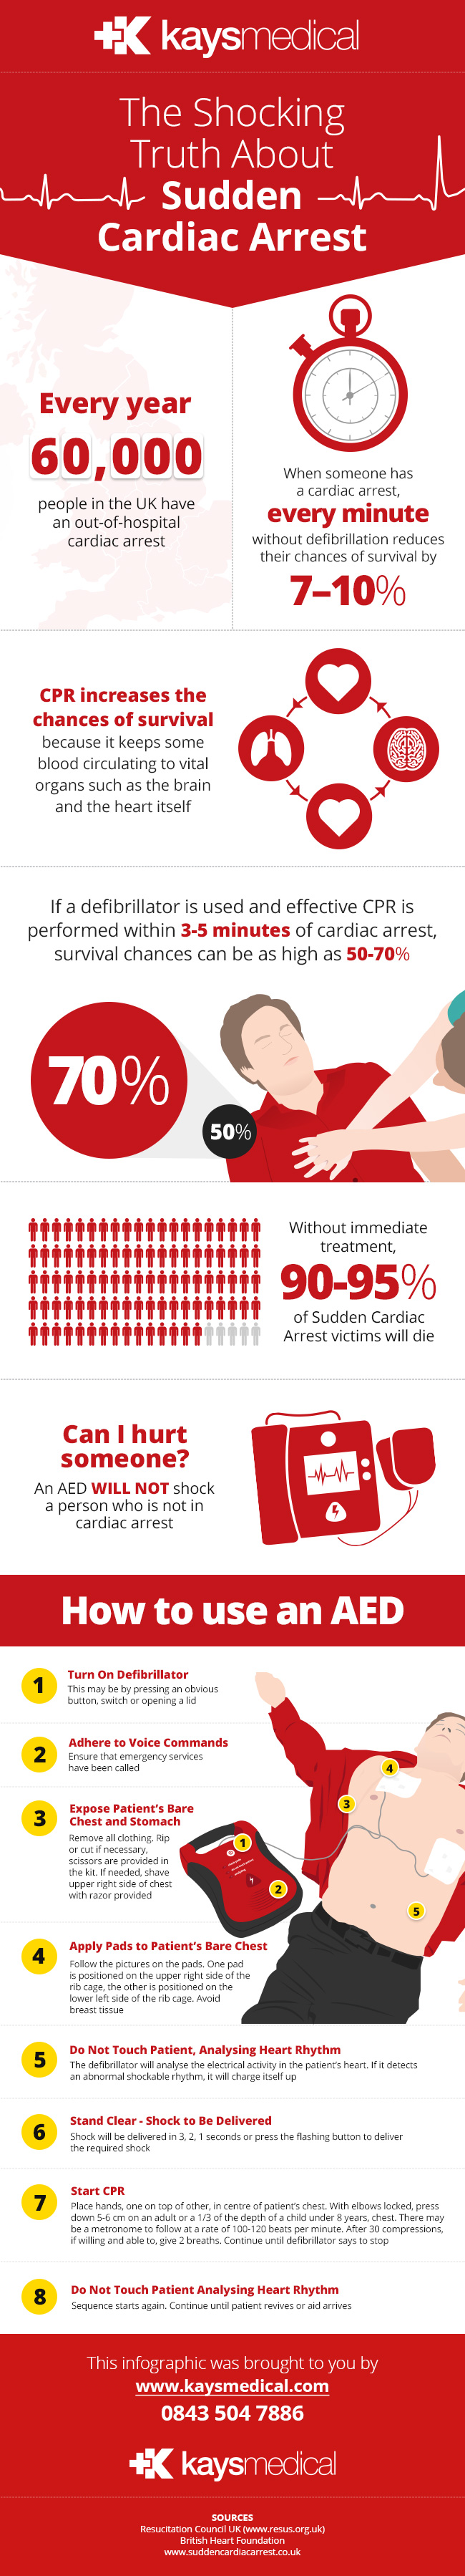 what to do if someone is suffering from a cardiac arrest